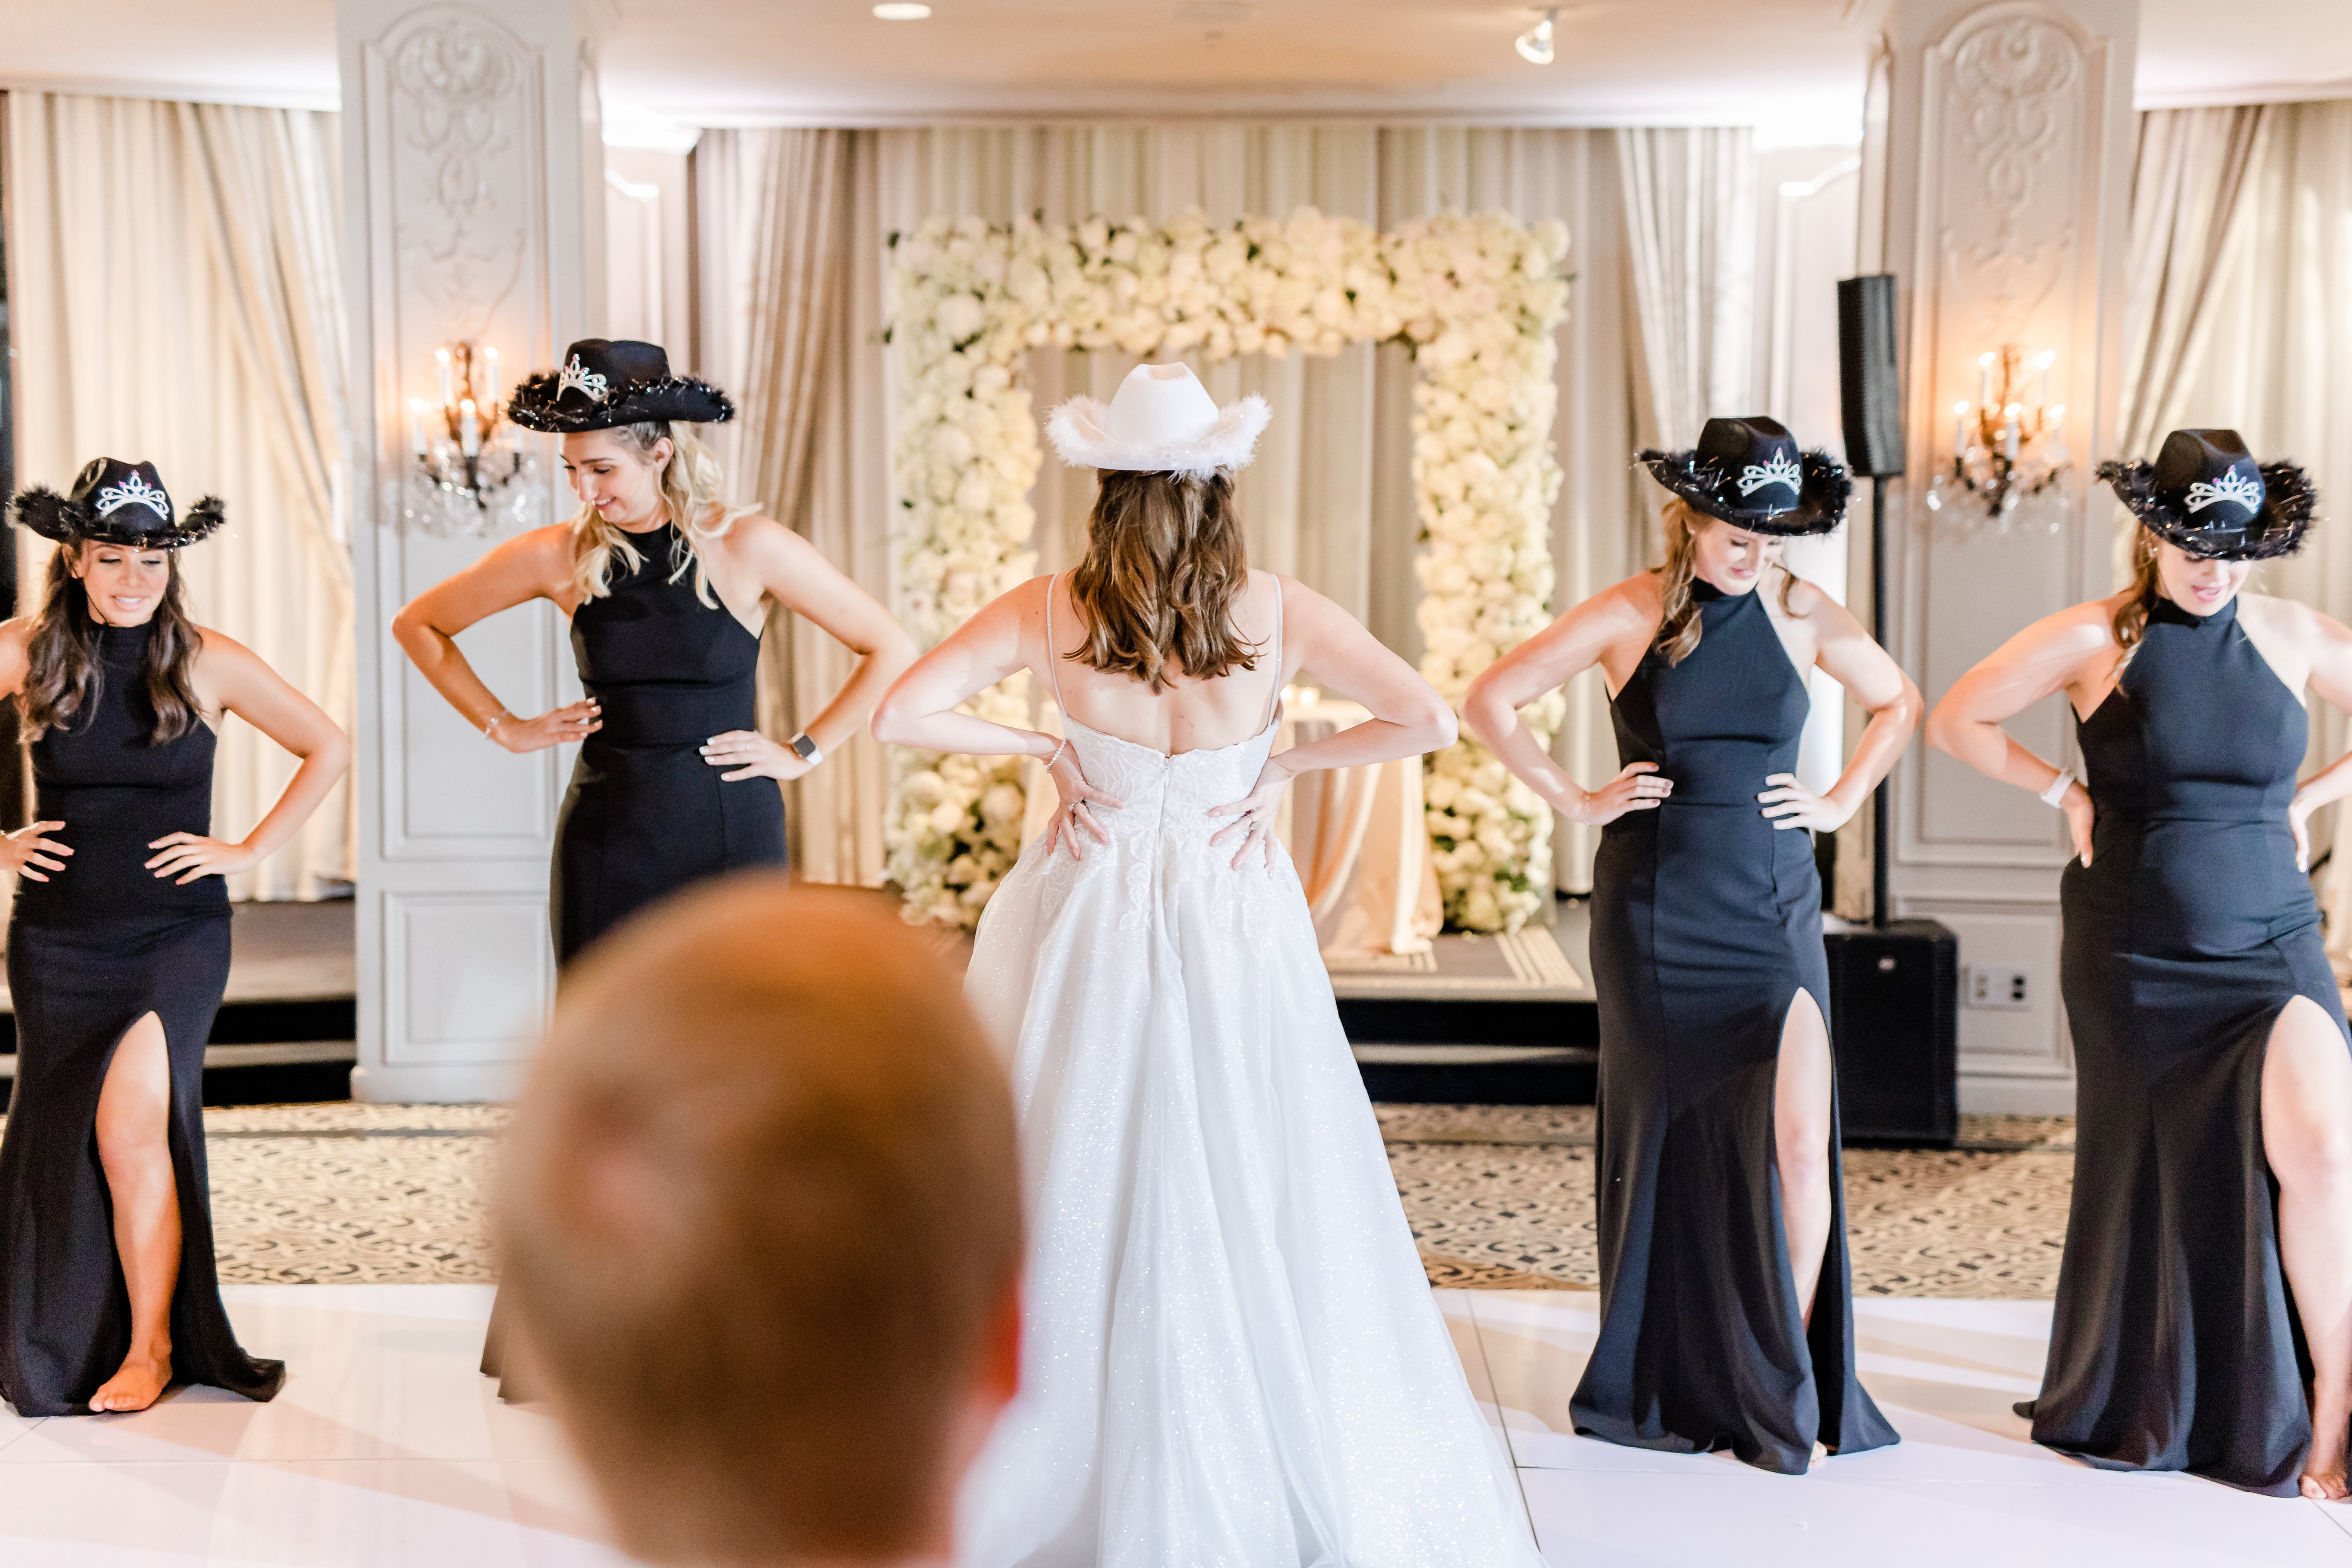 The bride performs a dance with her bridesmaids at her wedding reception. They are all wearing cowgirl hats with crowns in the Houston museum district.